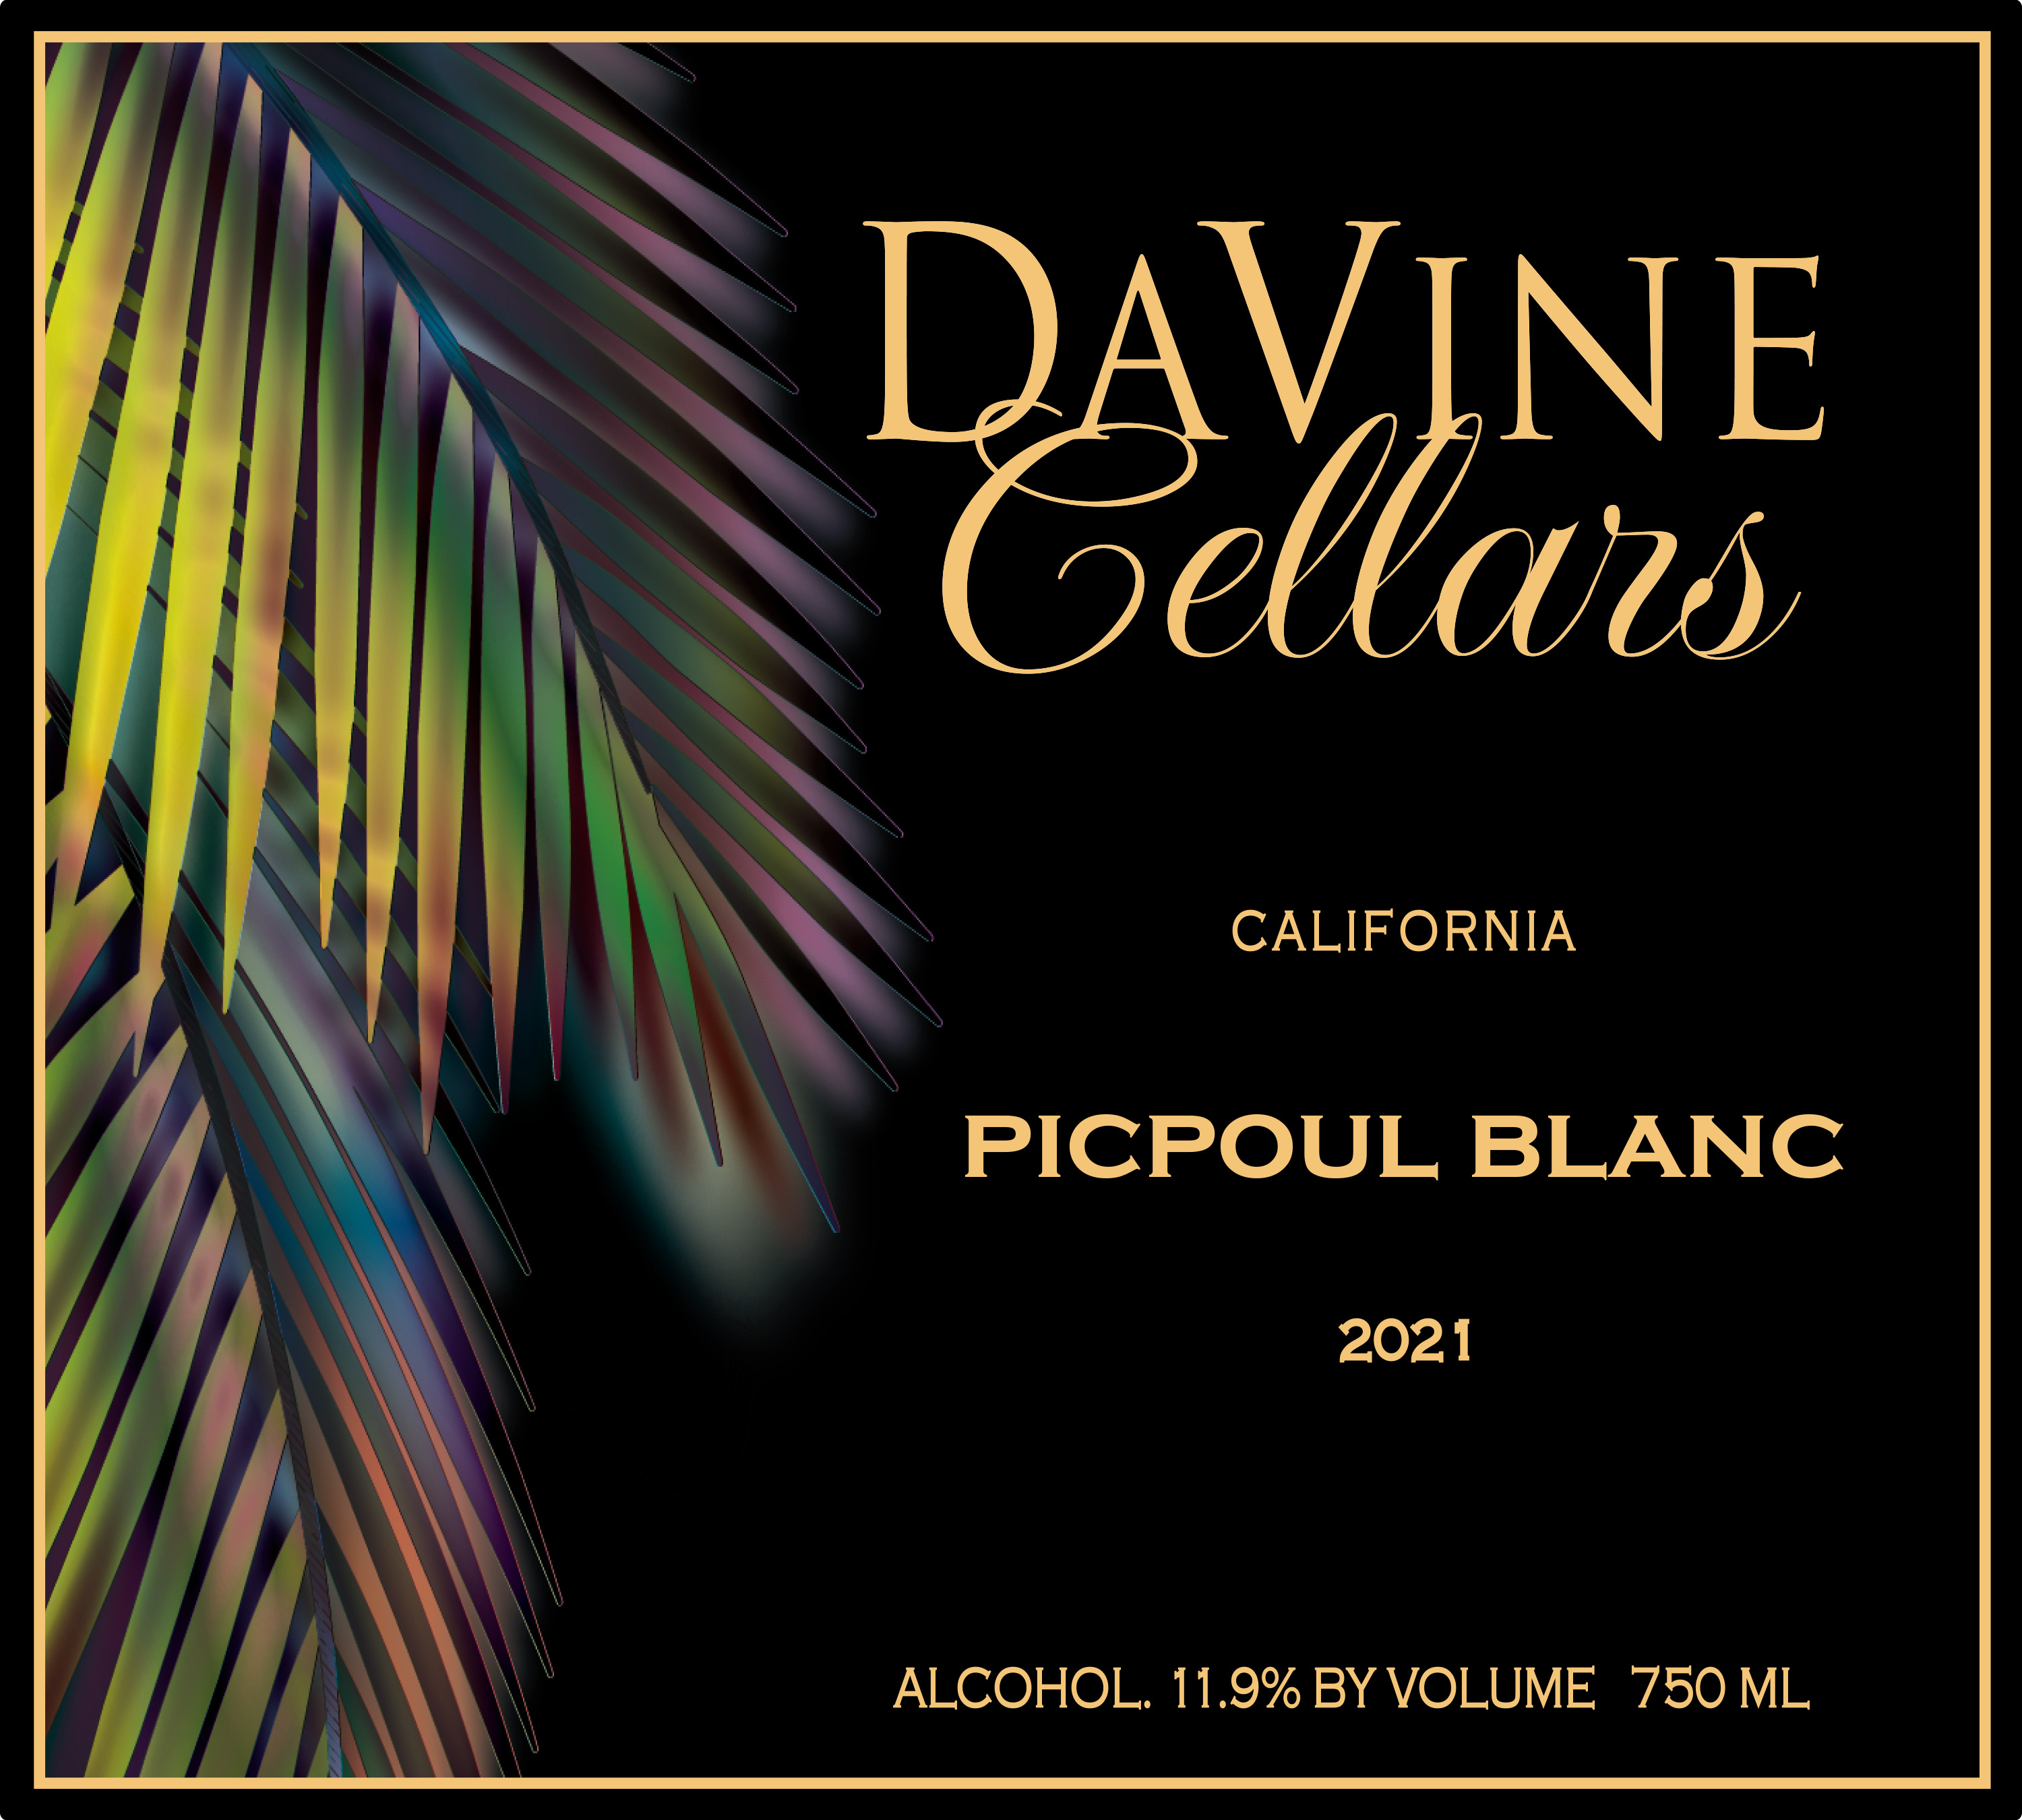 Product Image for 2021 Picpoul Blanc "Oui Oui"